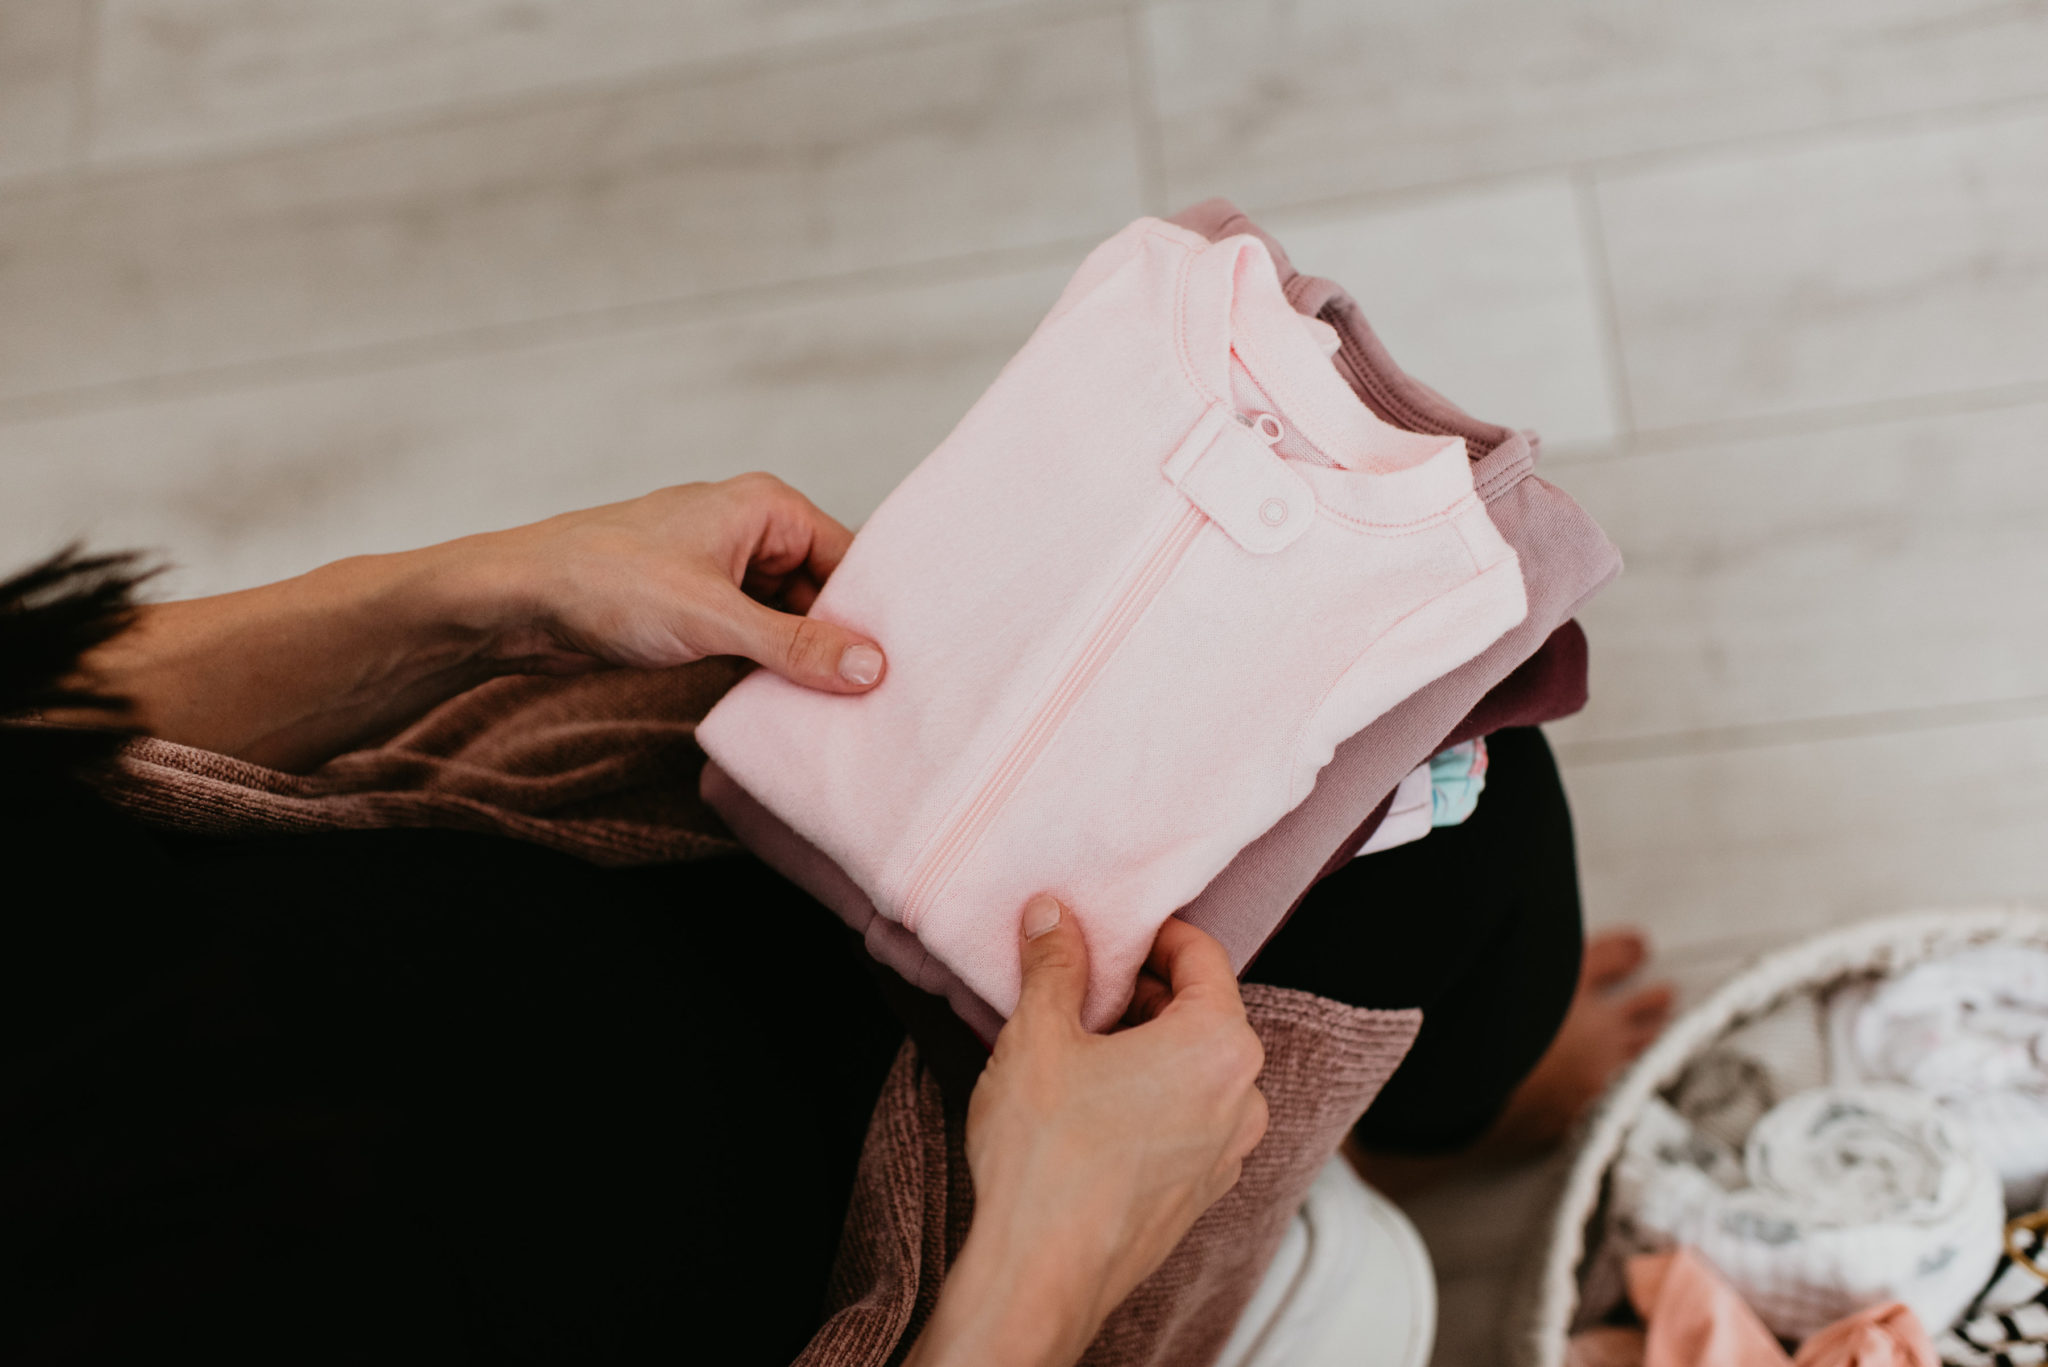 Getting Ready for Baby with Dreft Newborn by popular Las Vegas blogger, Outfits & Outings